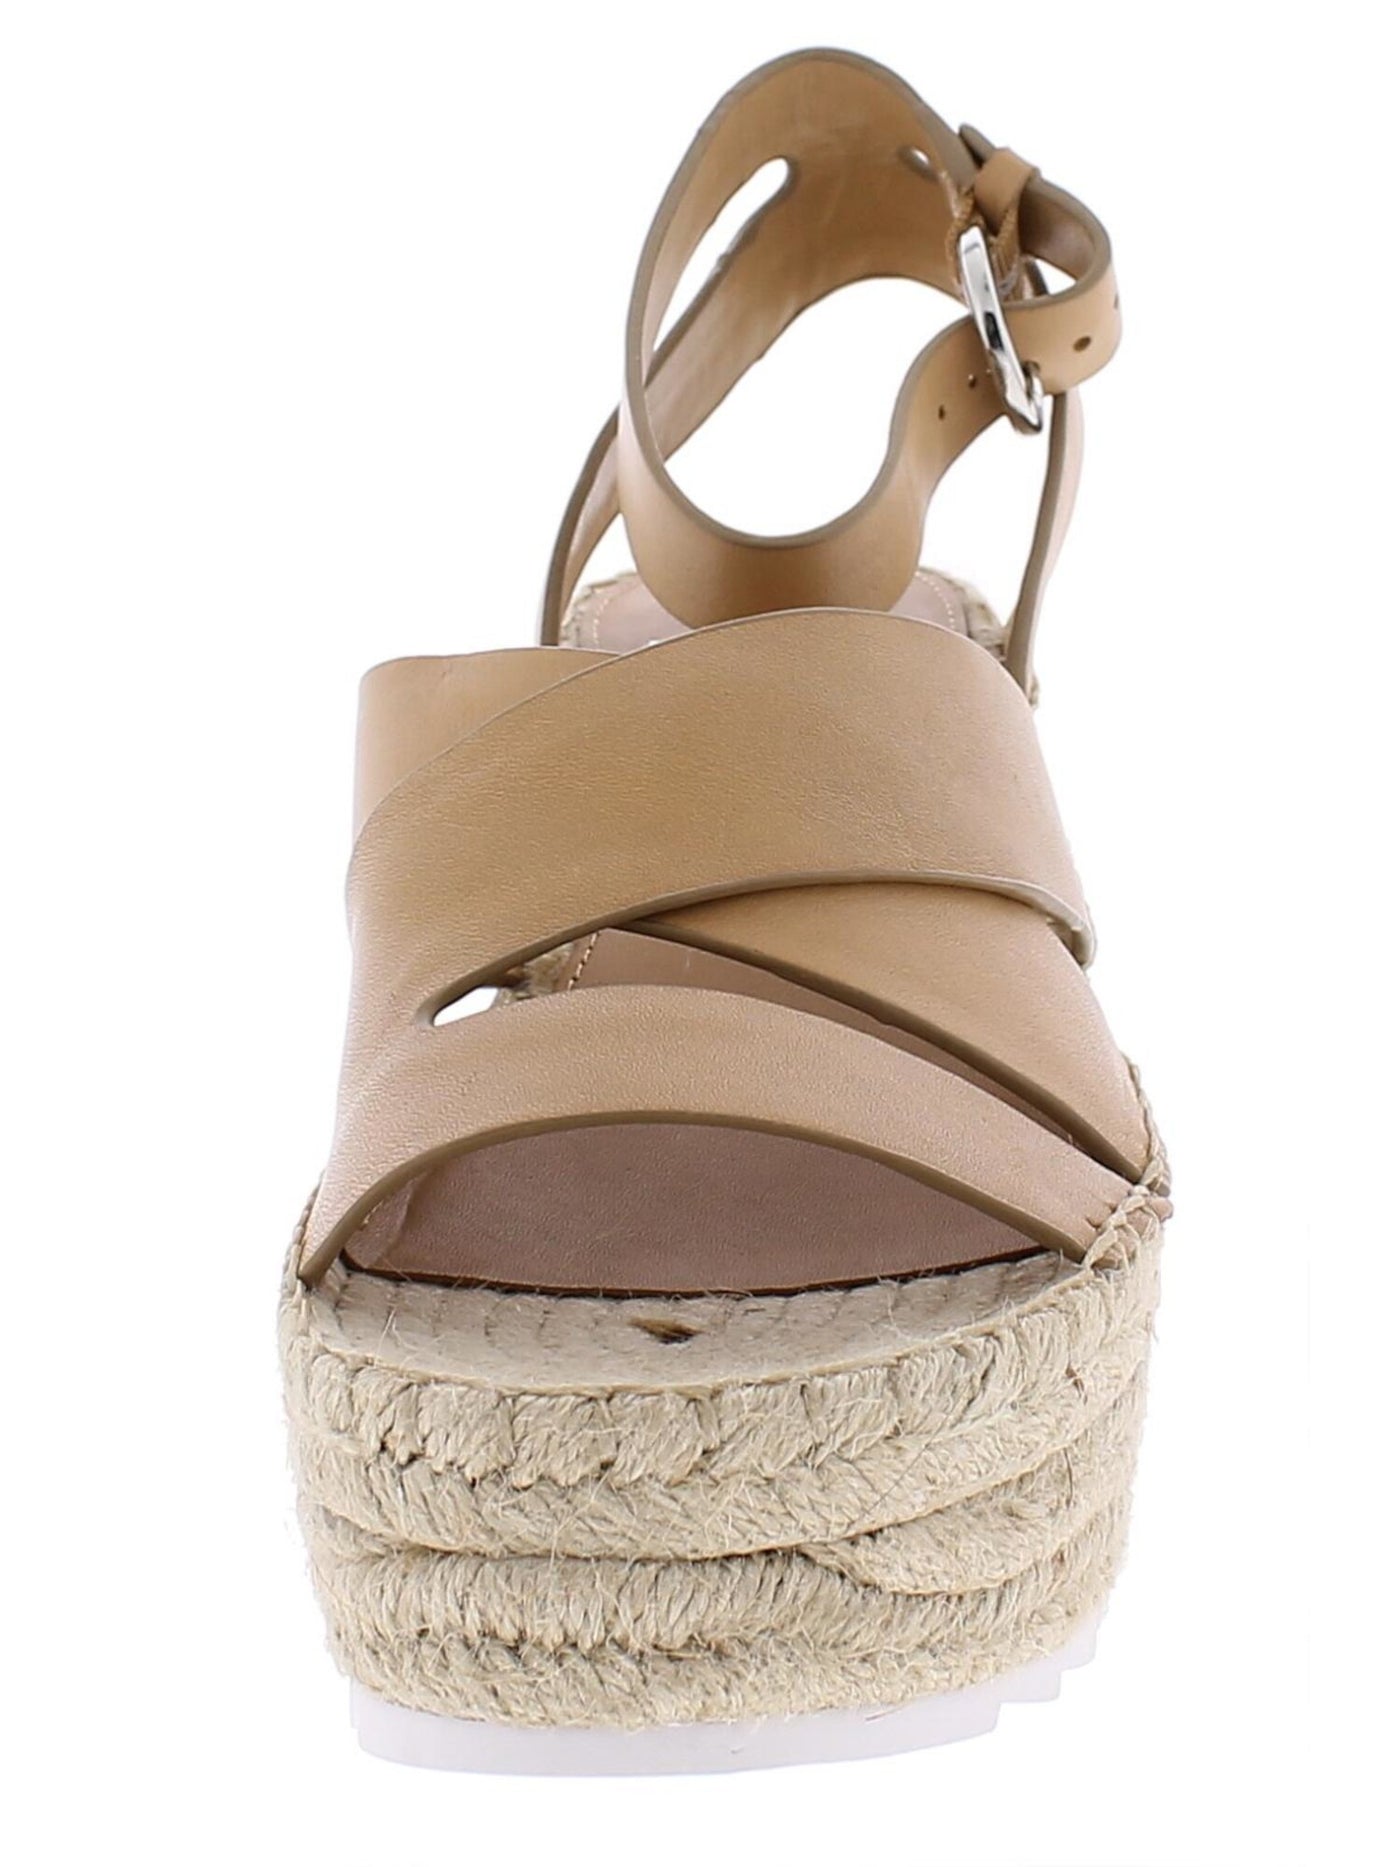 MARC FISHER Womens Beige 2" Platform Adjustable Ankle Strap Raffa Round Toe Wedge Buckle Leather Espadrille Shoes 9.5 M